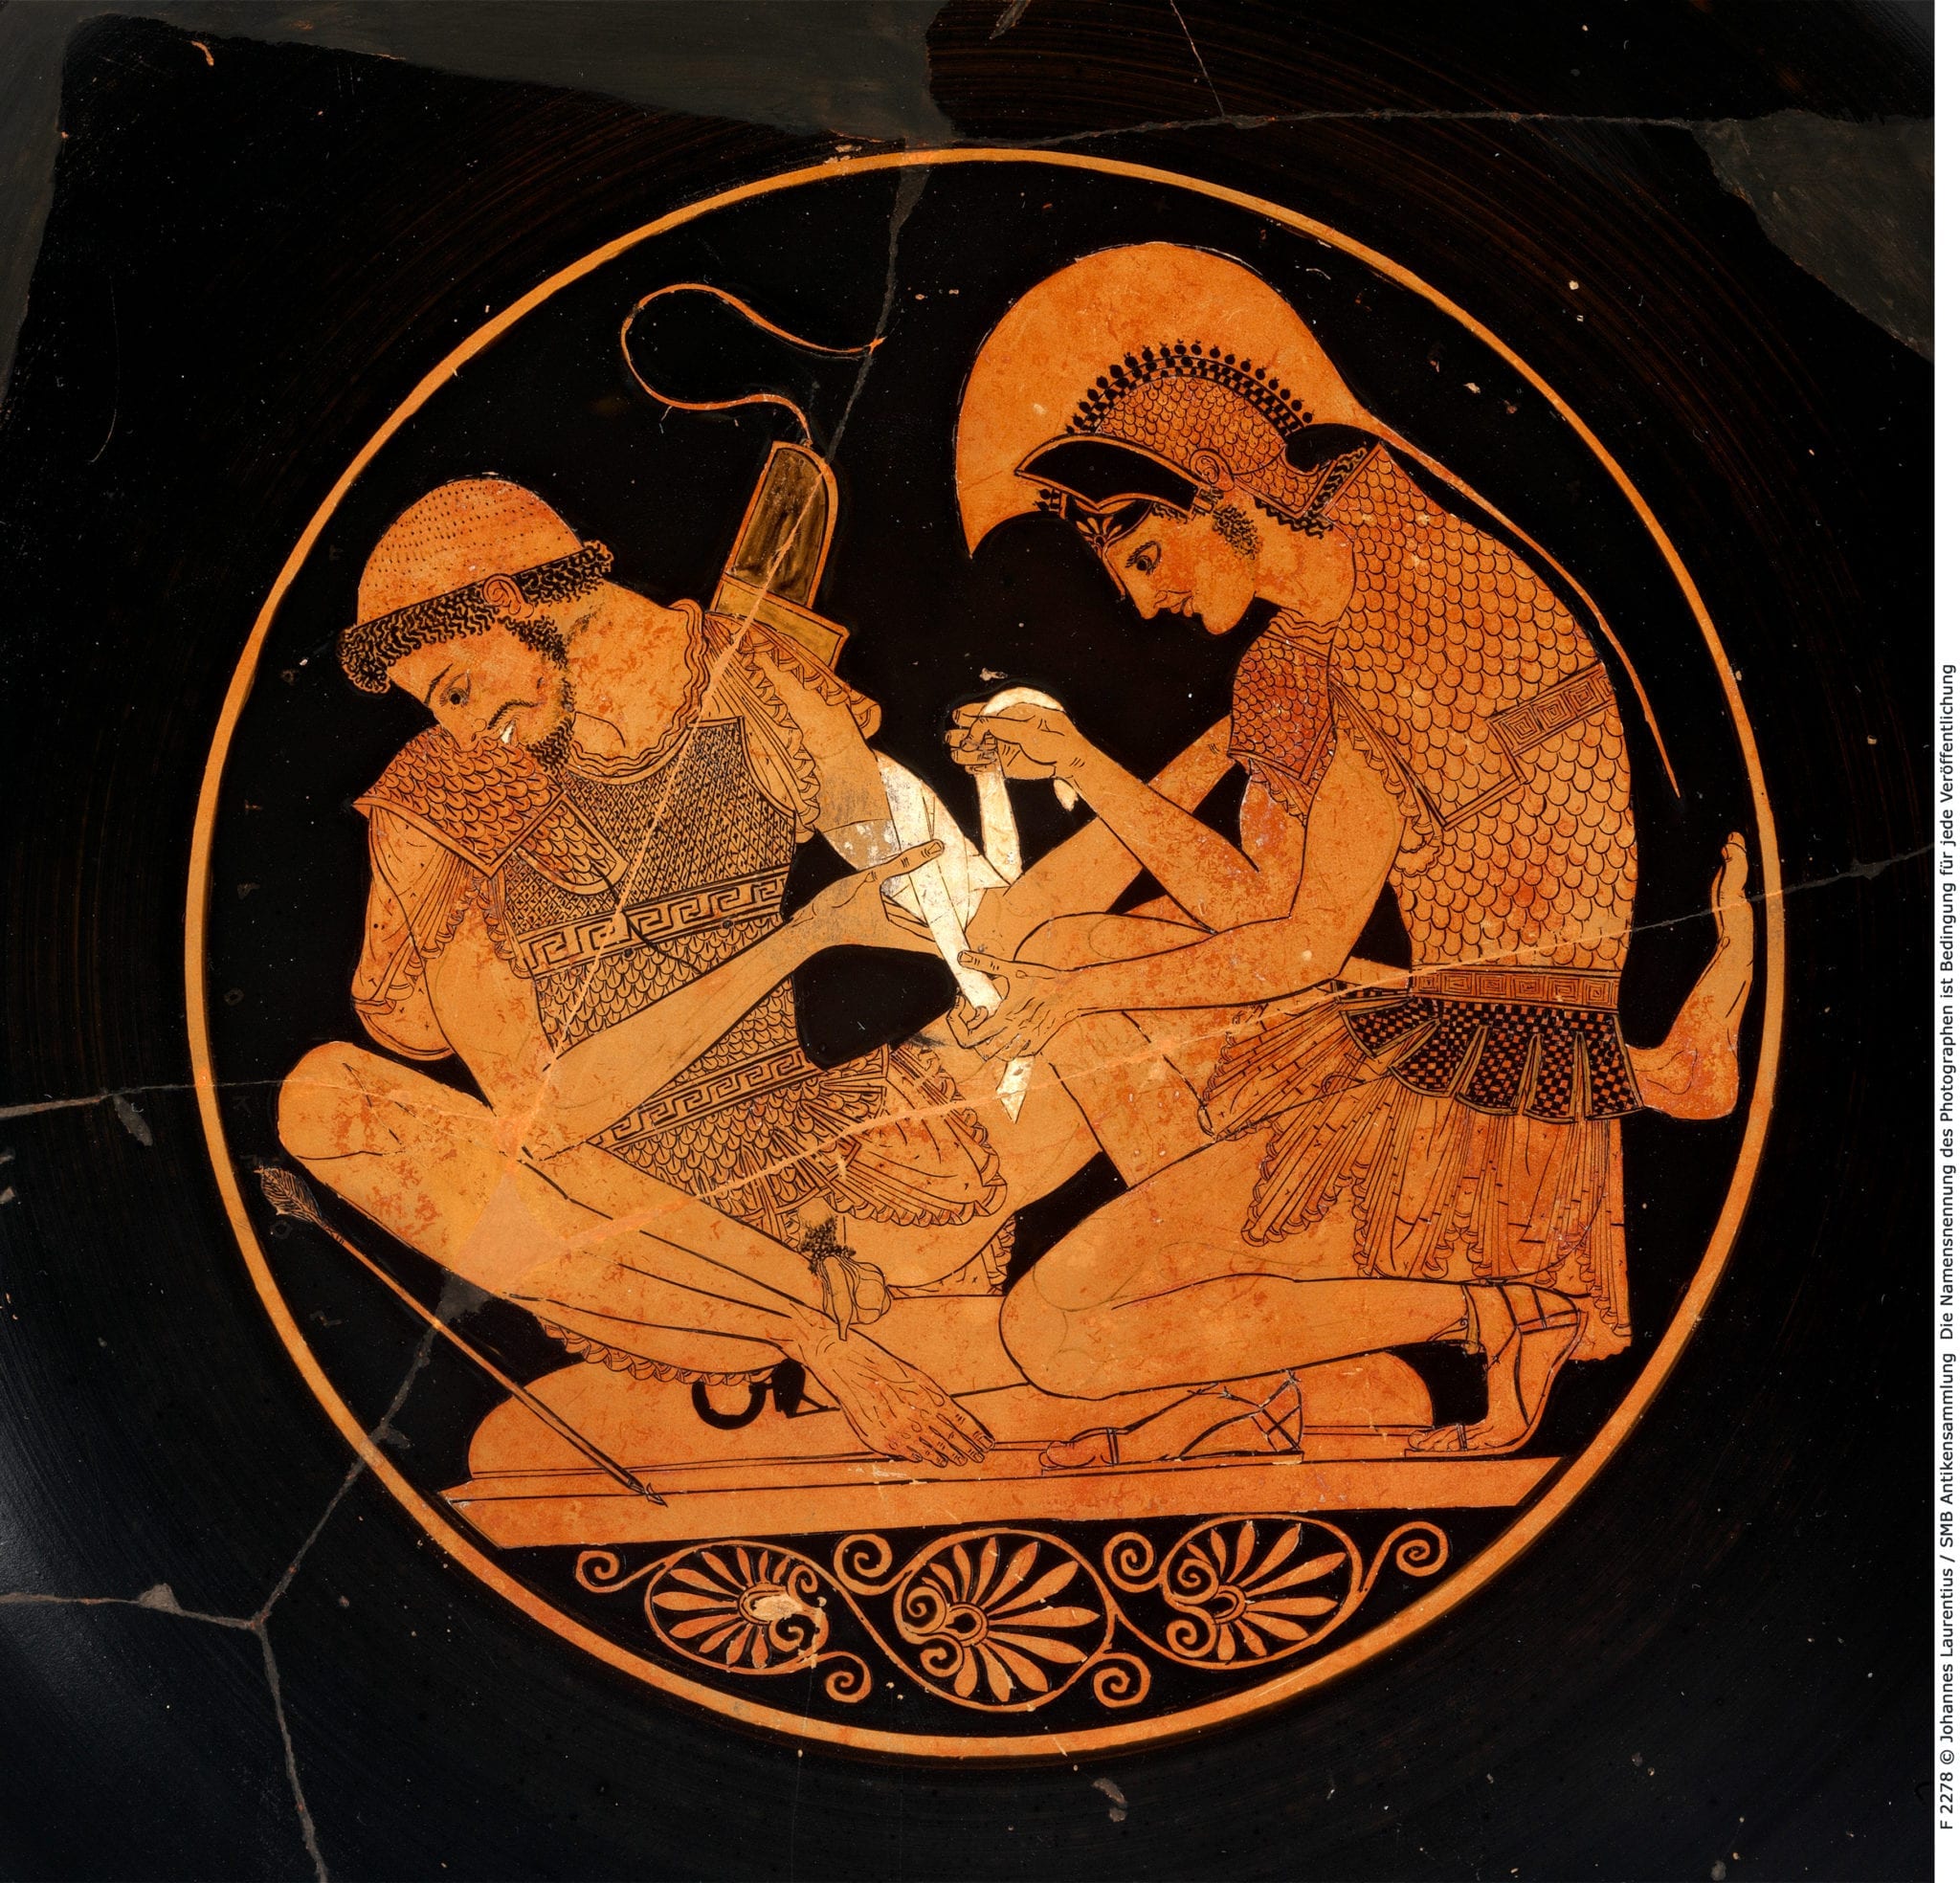 Illustration on the interior of a Greek kylix, Achilles dressing the wounds of Patroclus, central figures in the Iliad